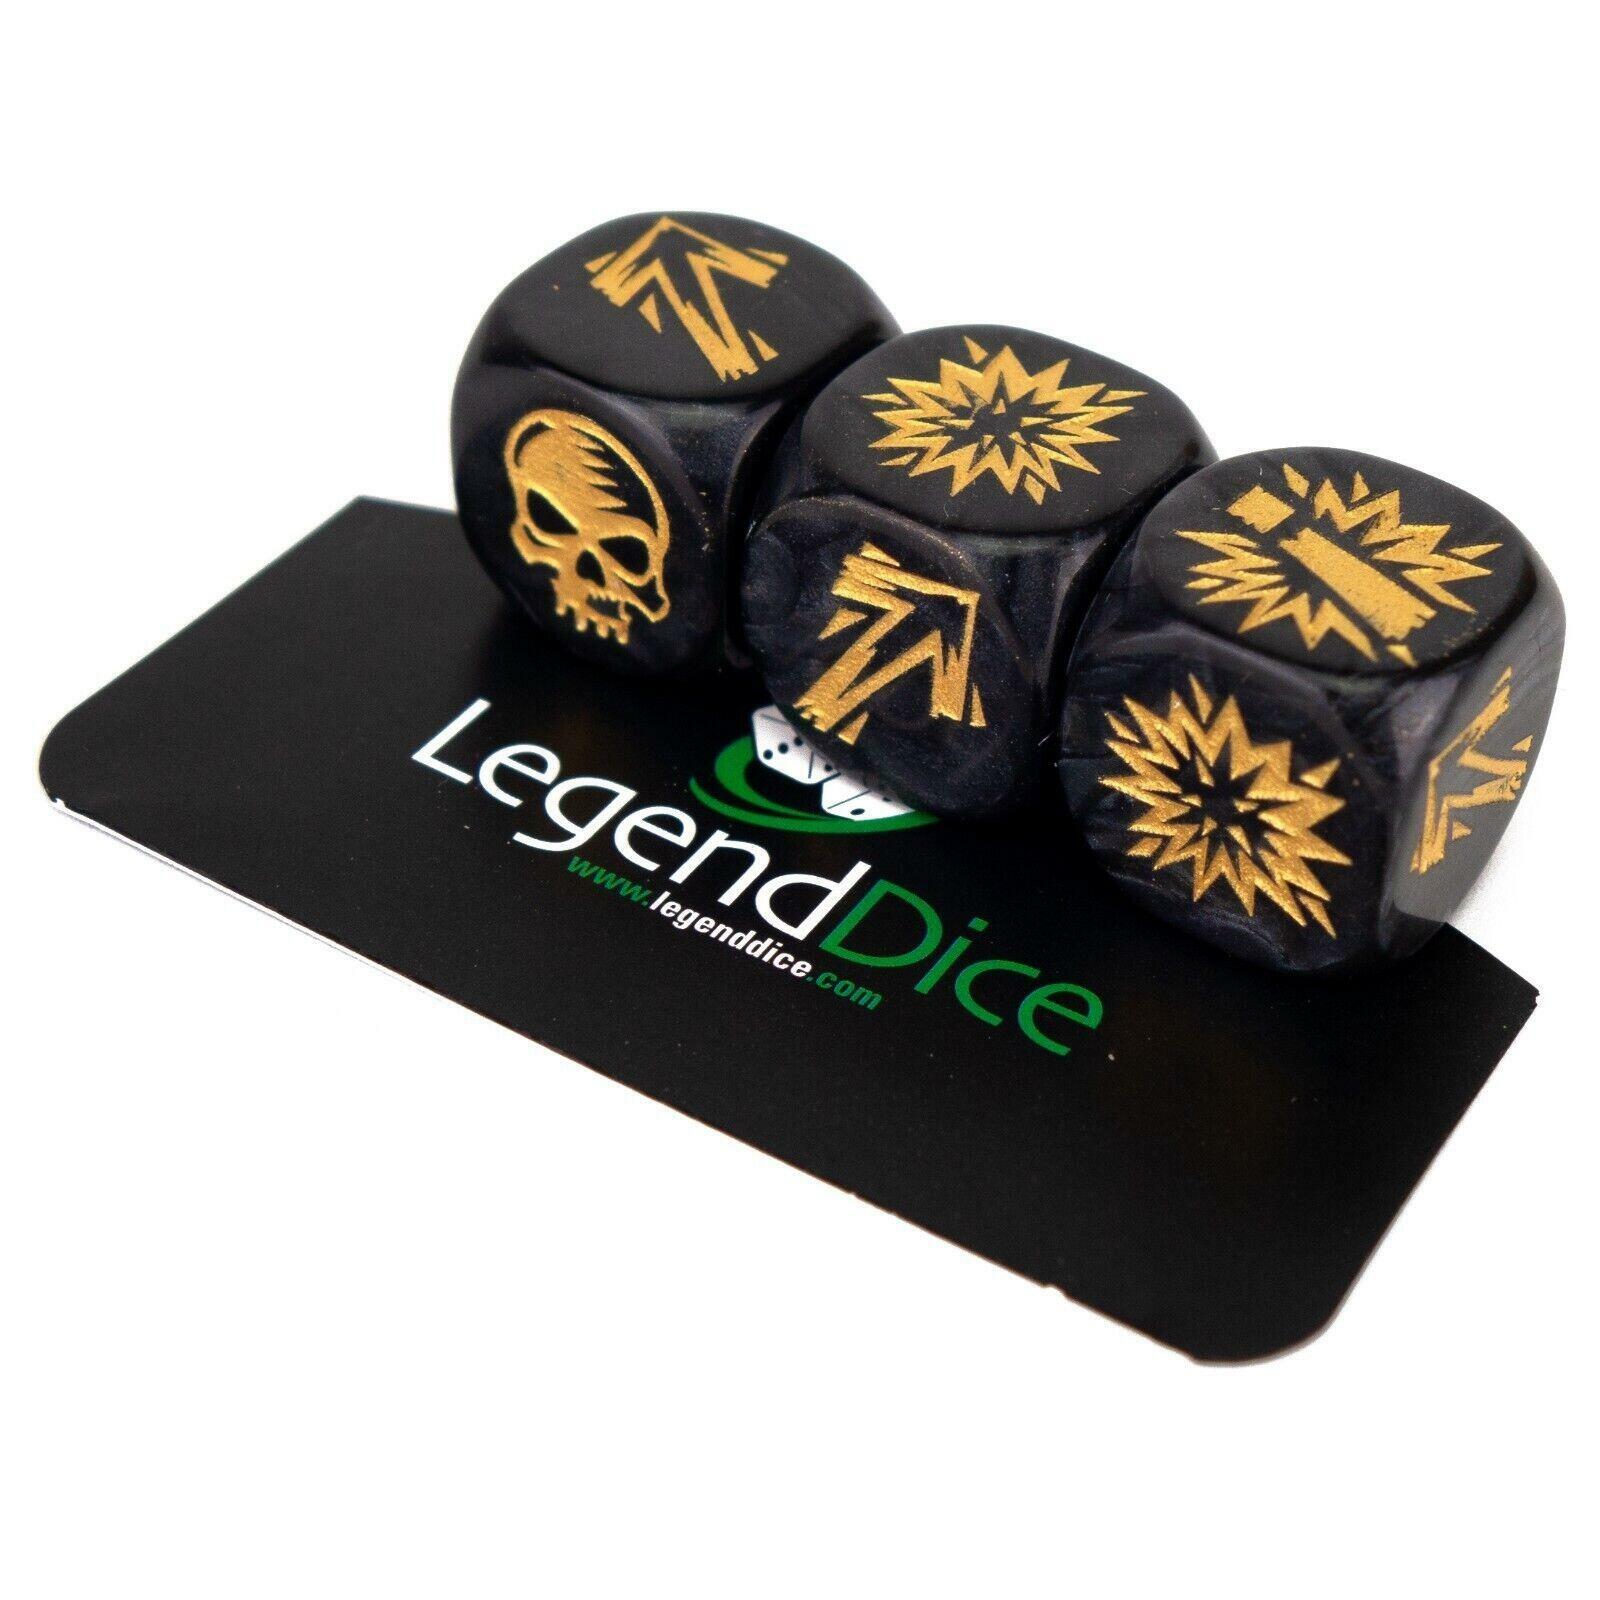 Picture of Blocking Dice Set - Pearl Black (Gold) with bag